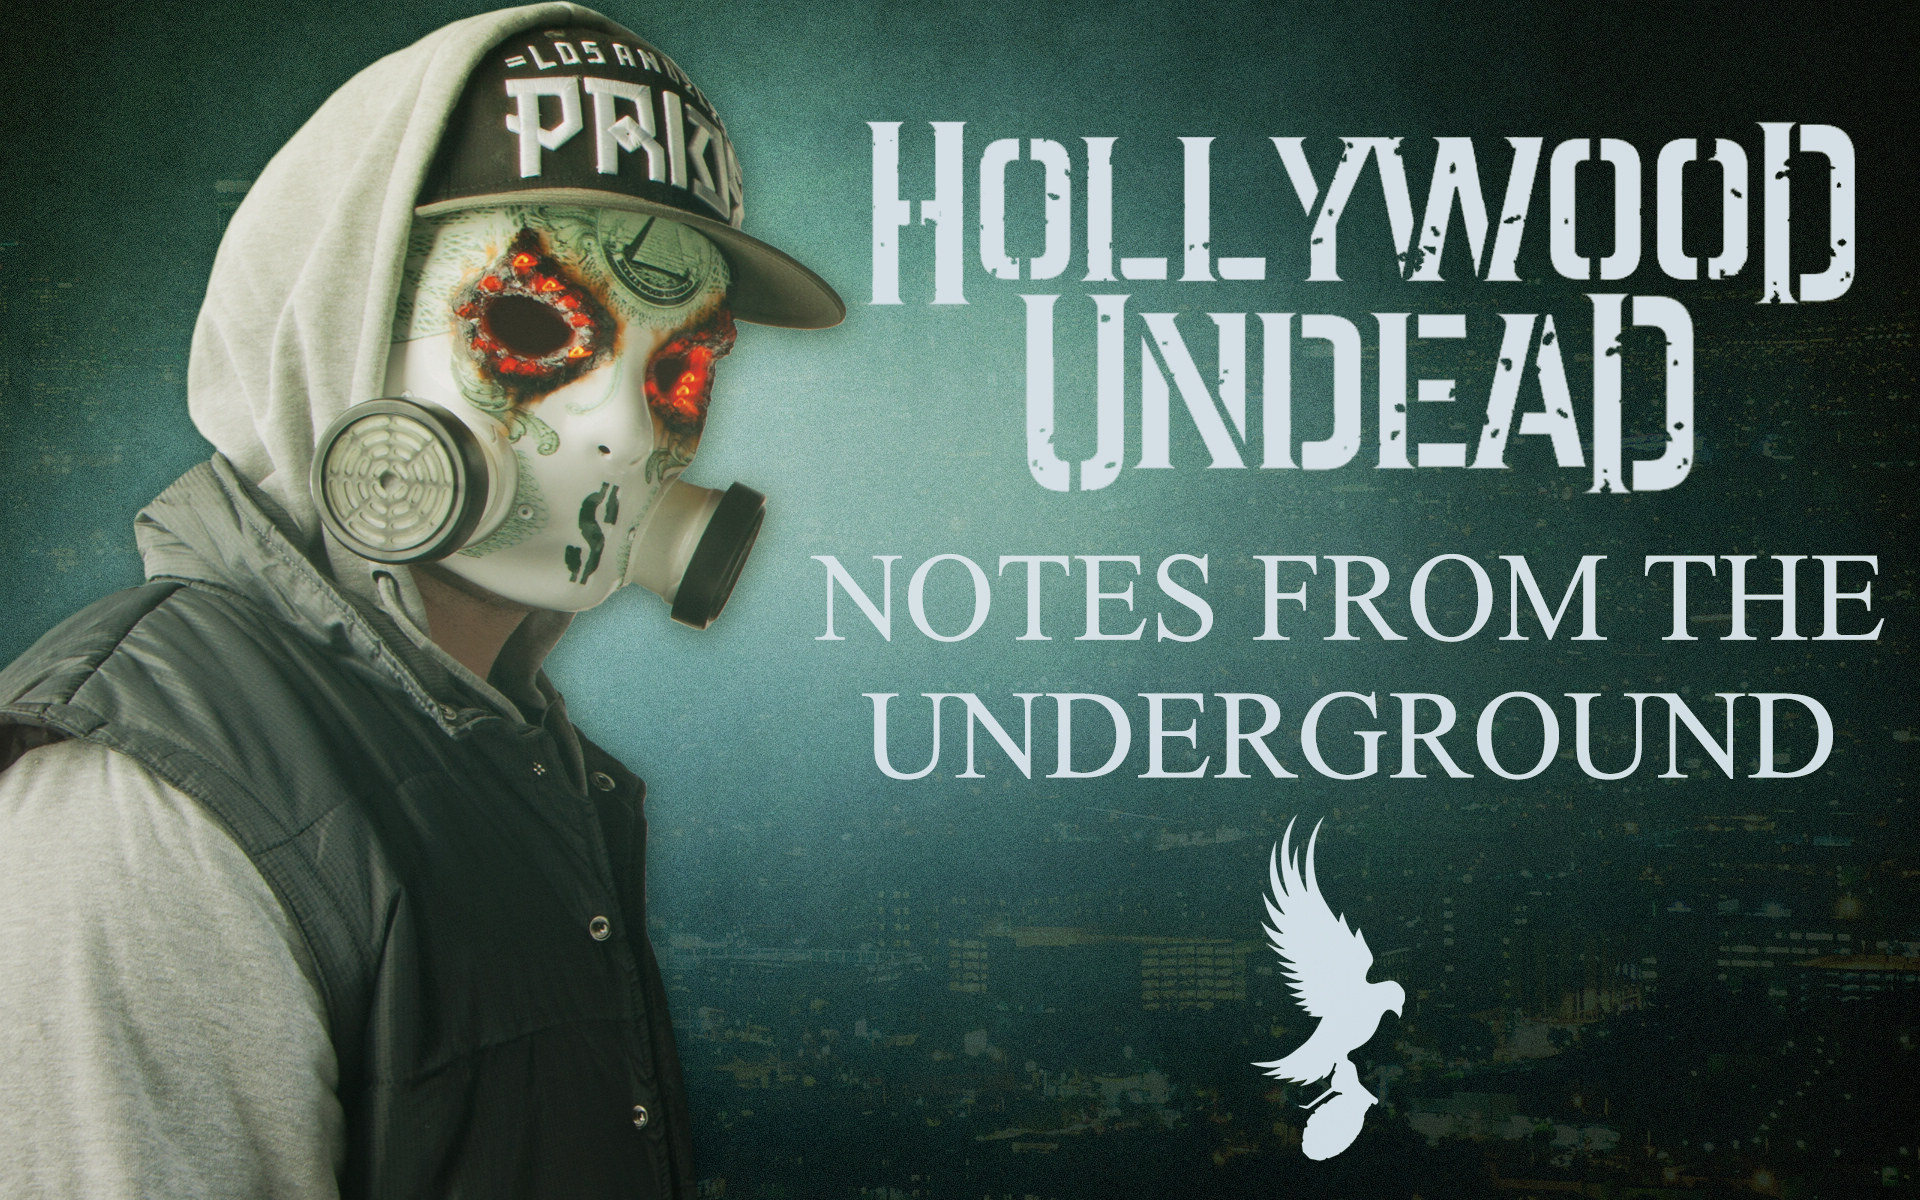 Hollywood Undead(ֽ6)